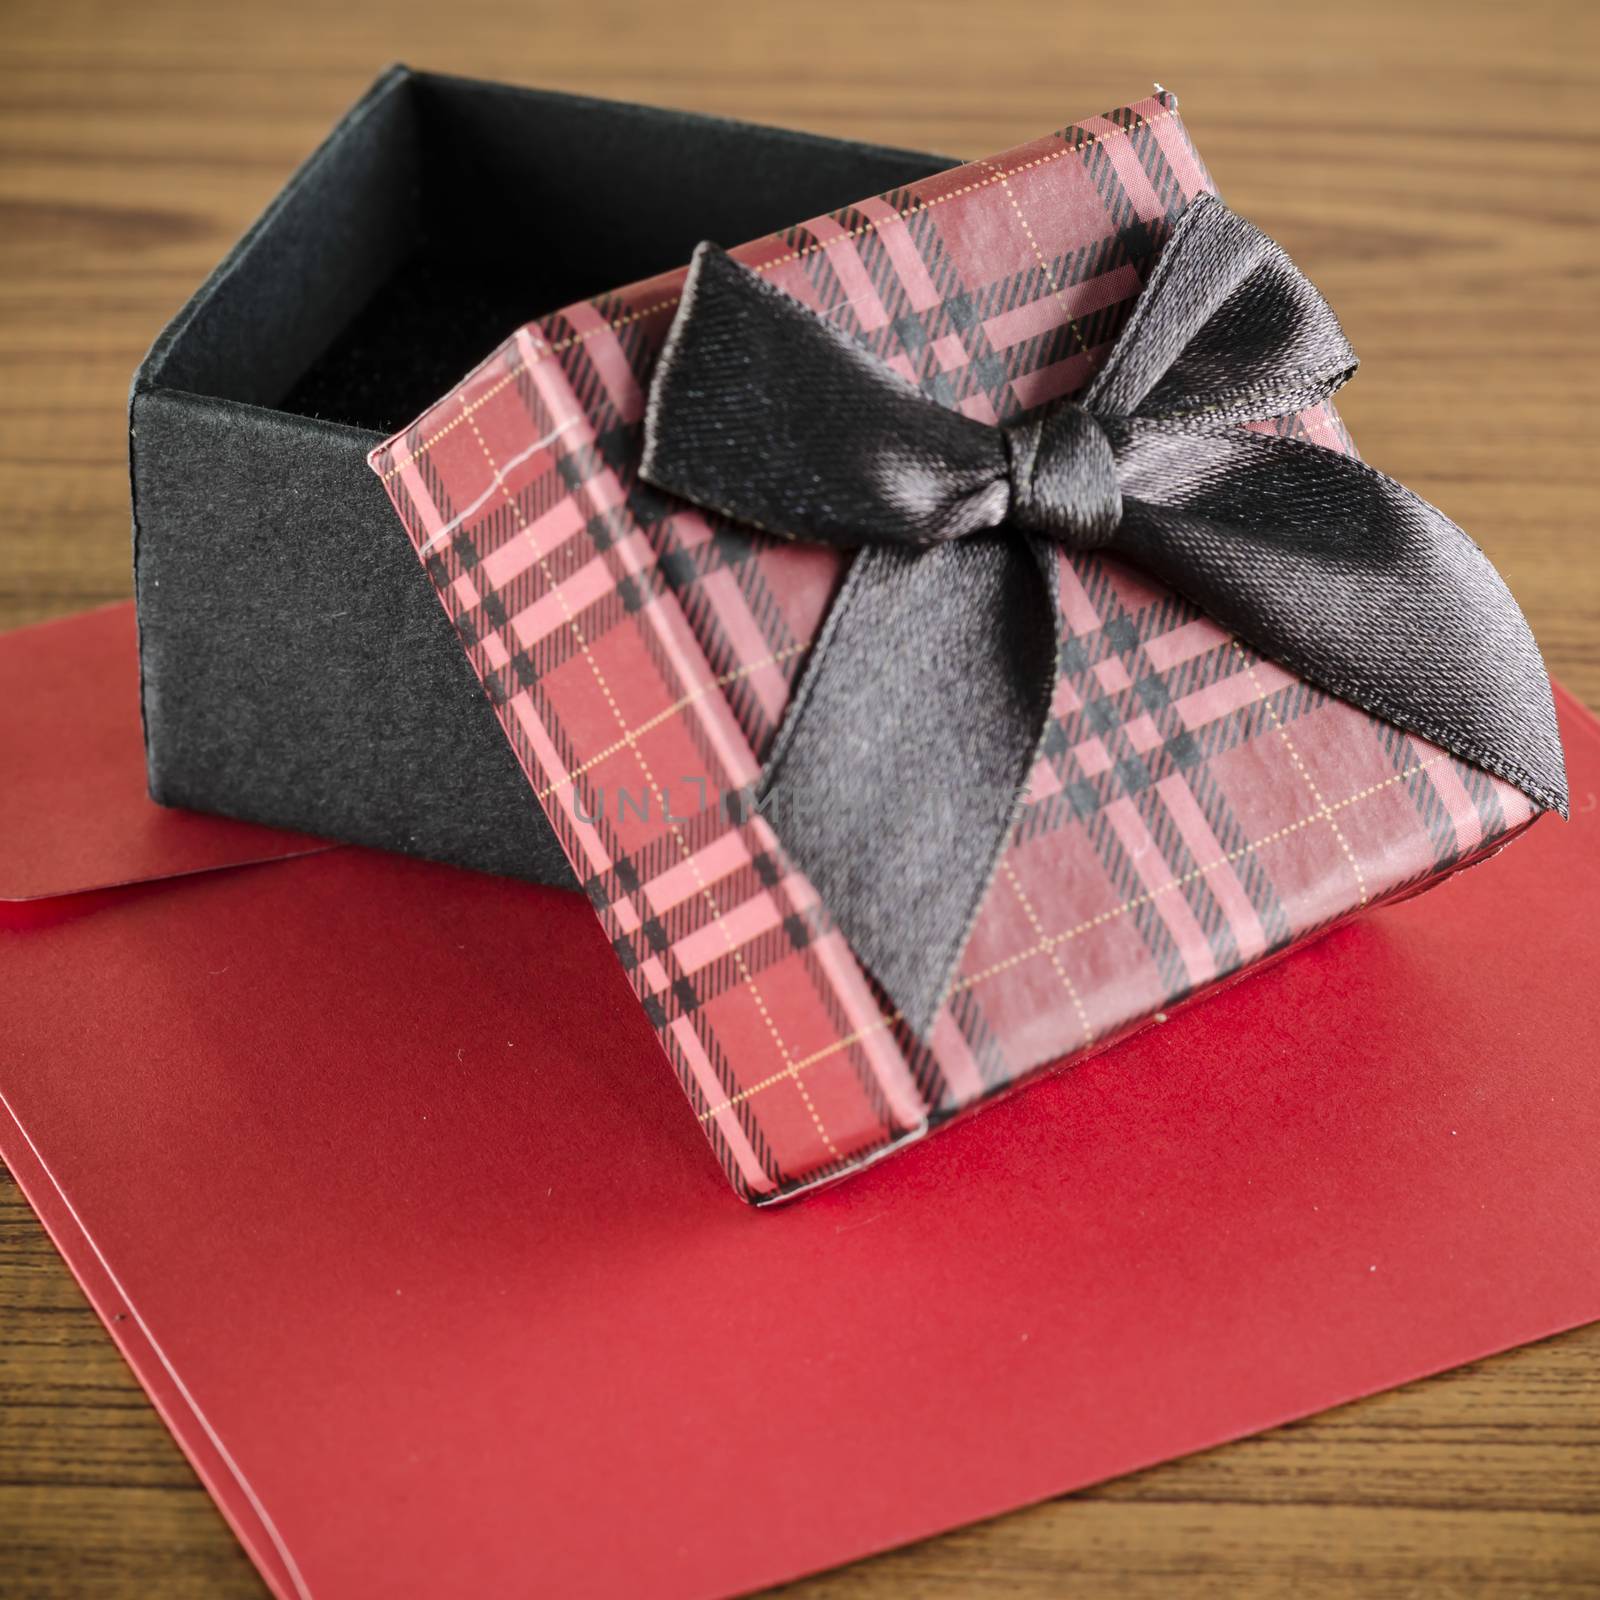 red gift box and envelope by ammza12